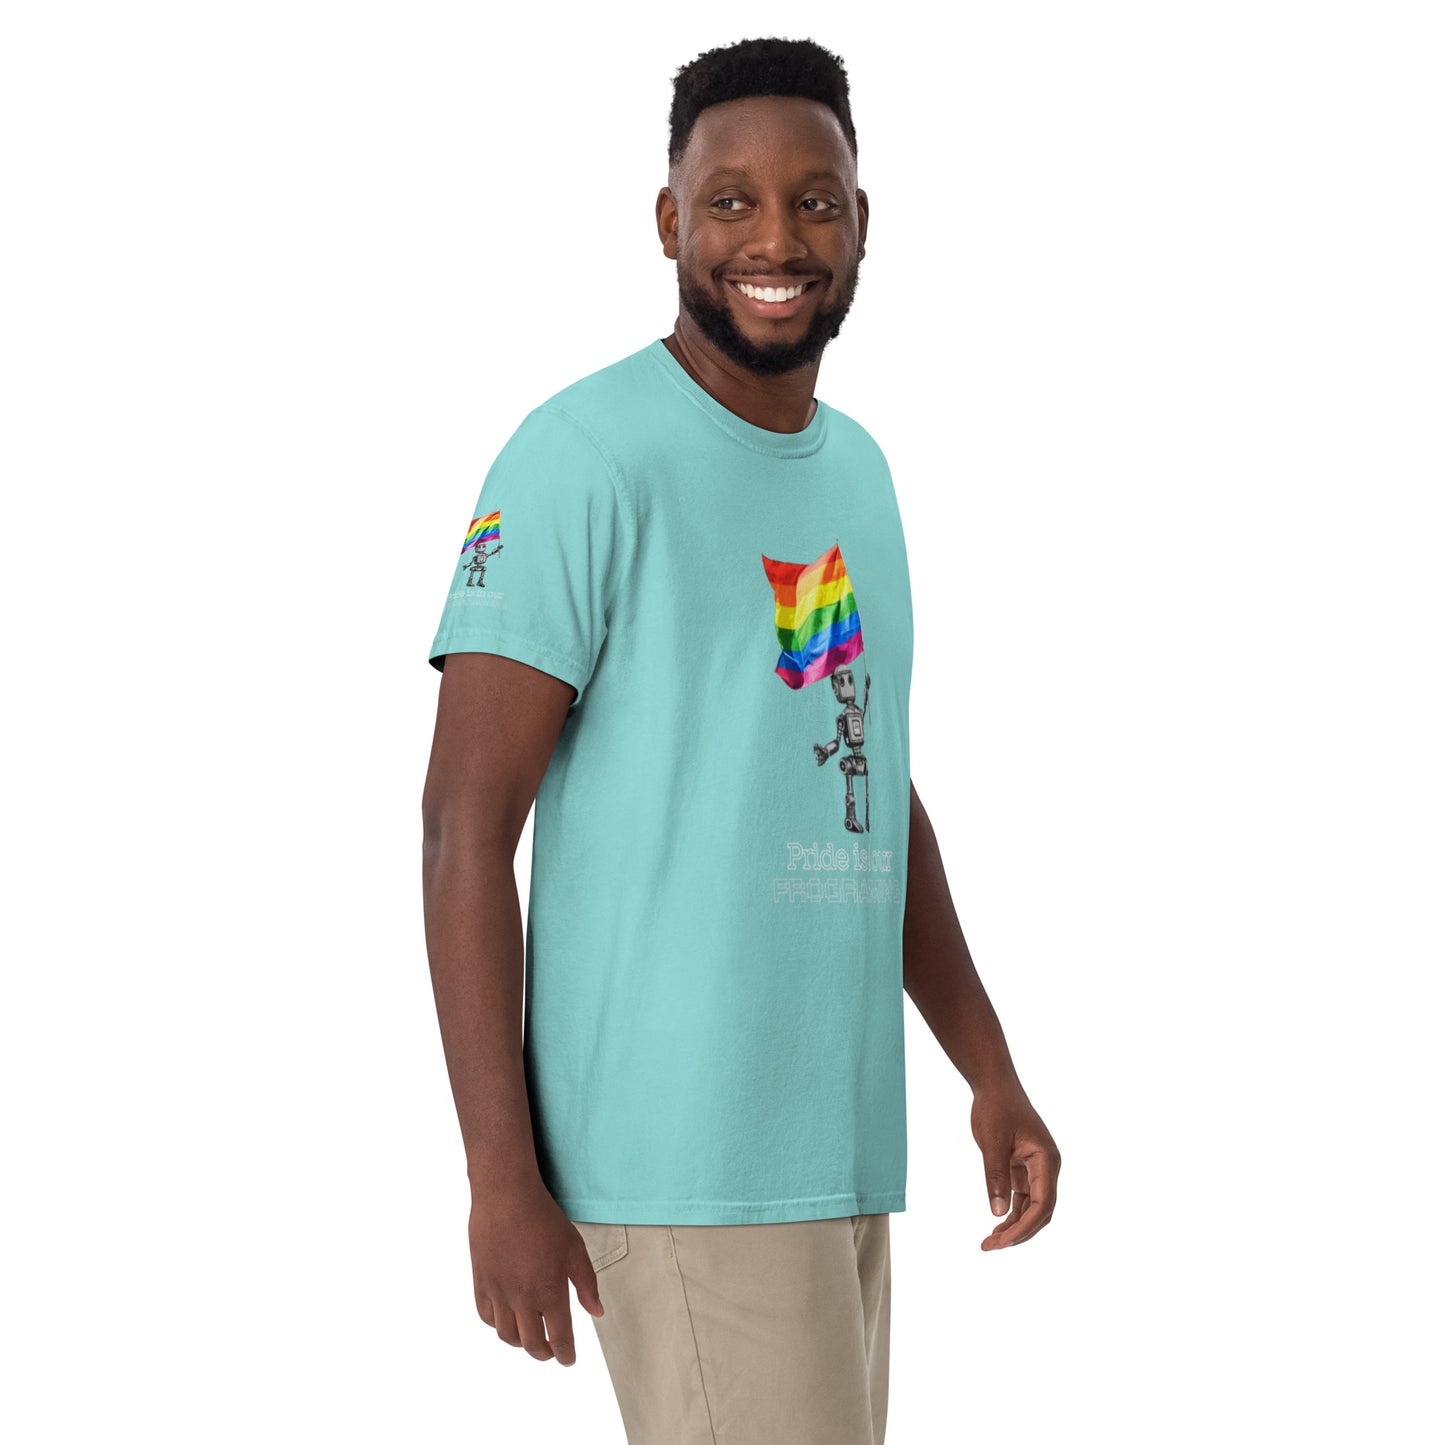 Pride is in our programming Tee